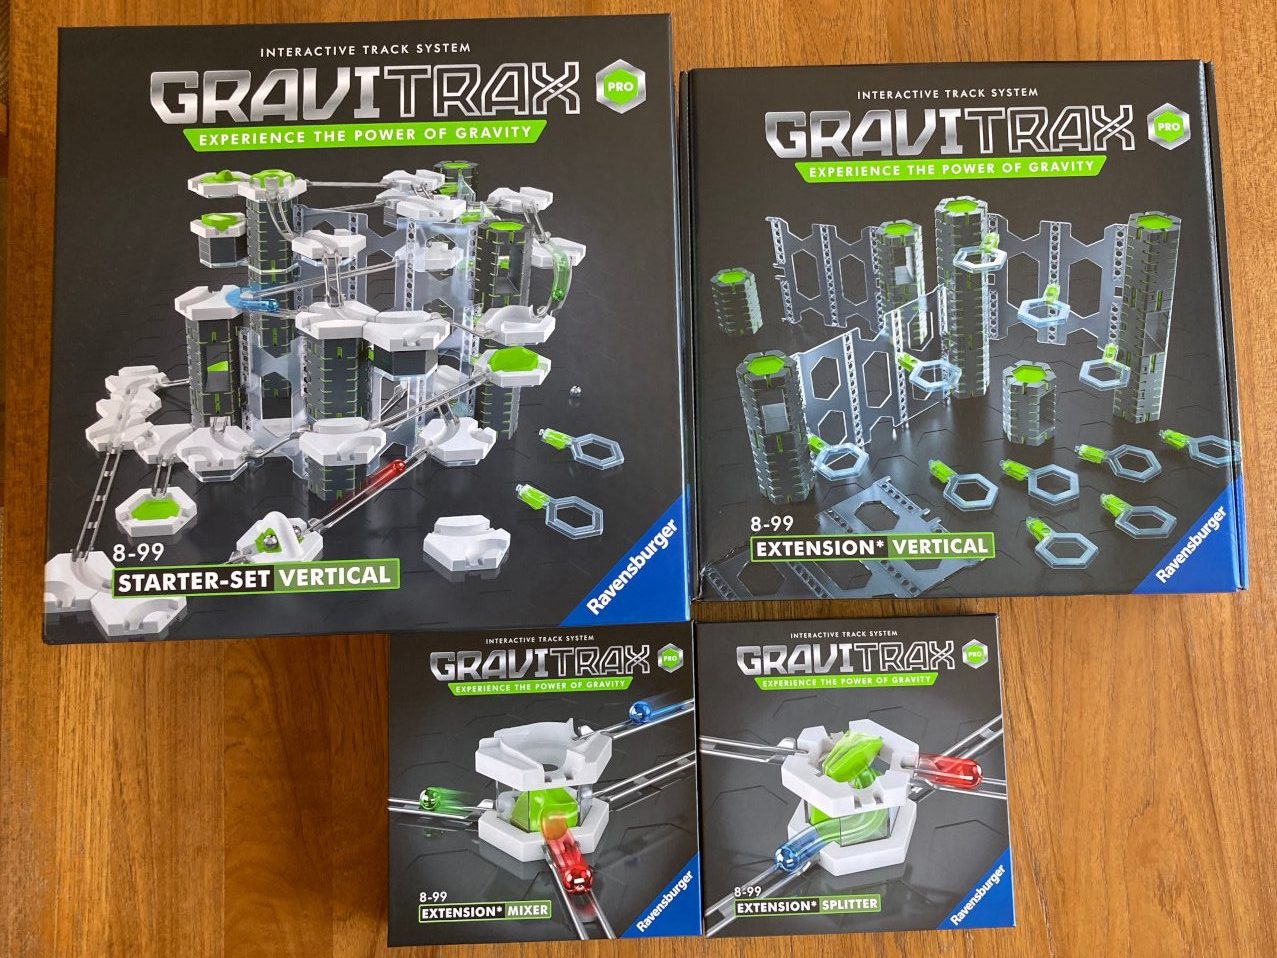 Review: GRAVITRAX PRO Makes Vertical Building Easier and Look Cleaner —  GeekTyrant